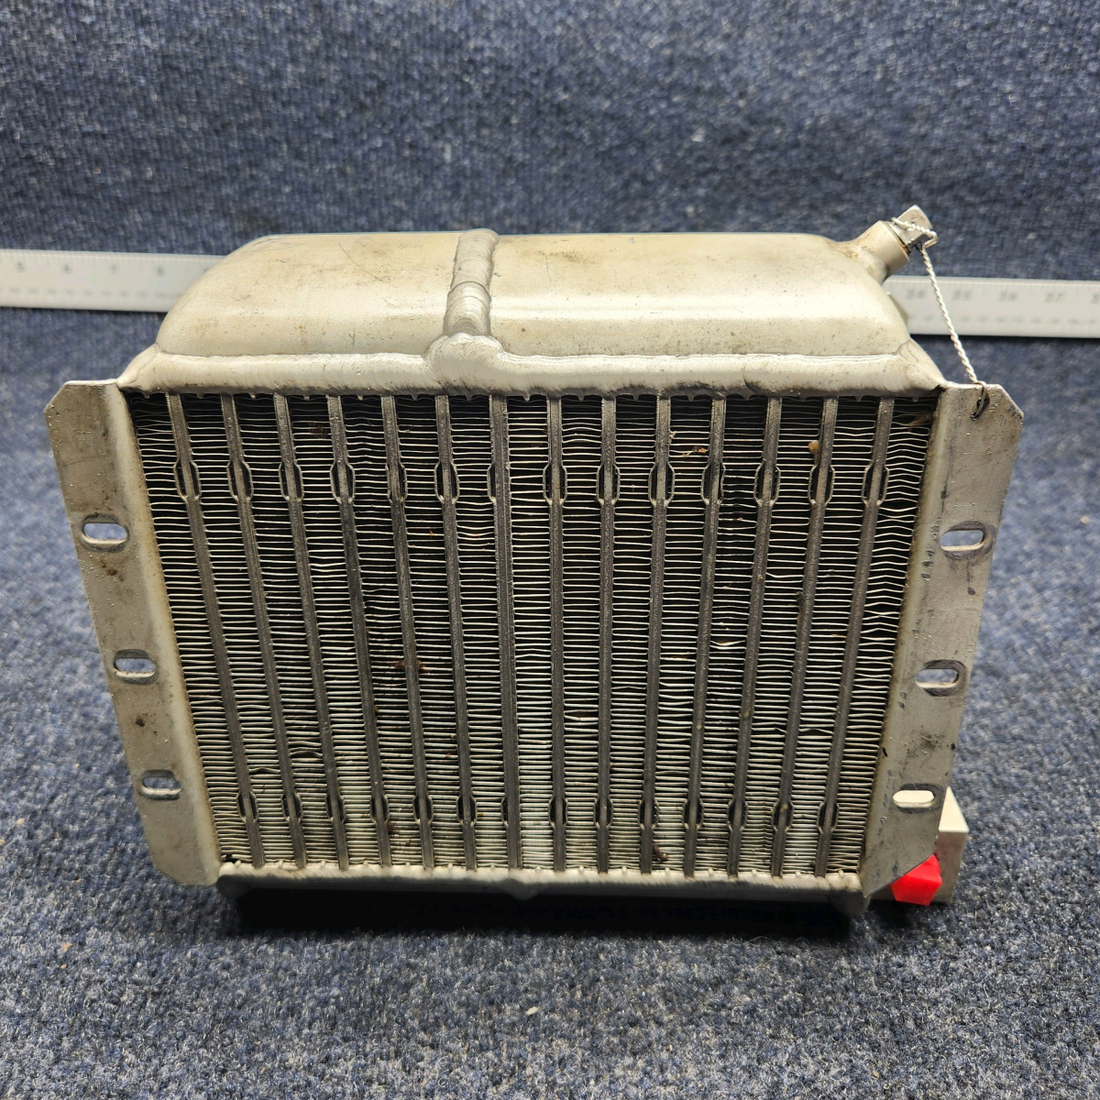 Used aircraft parts for sale, 10891A Continental TCM OIL COOLER ASSEMBLY CESSNA 182